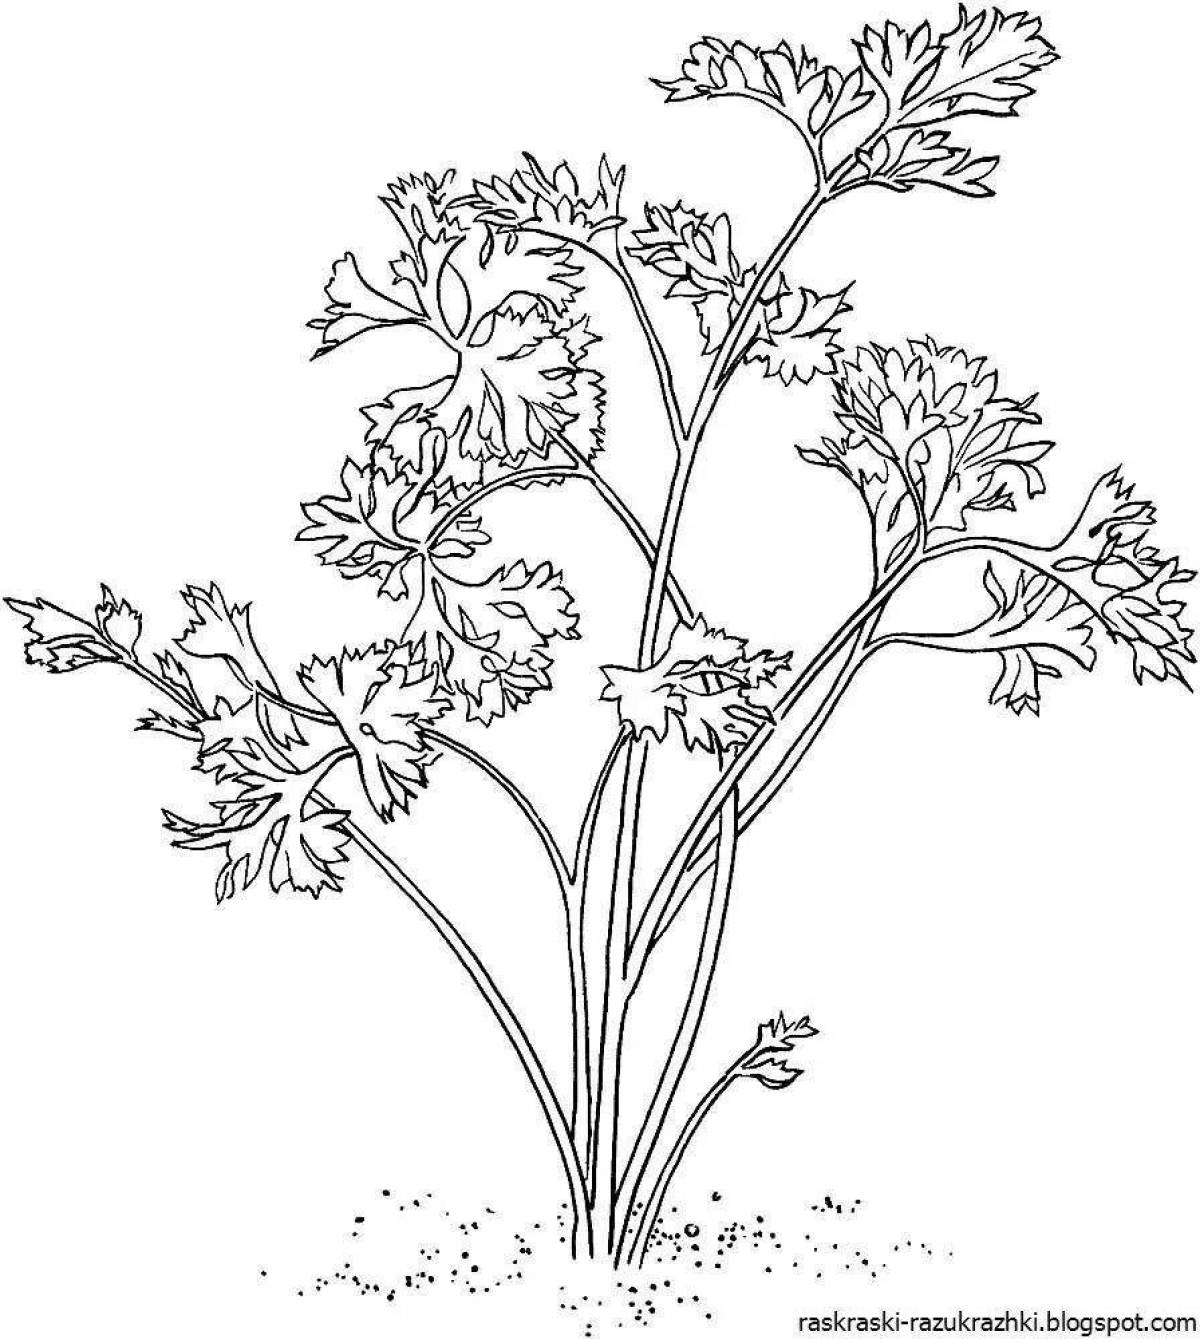 Fun coloring parsley for 3-4 year olds